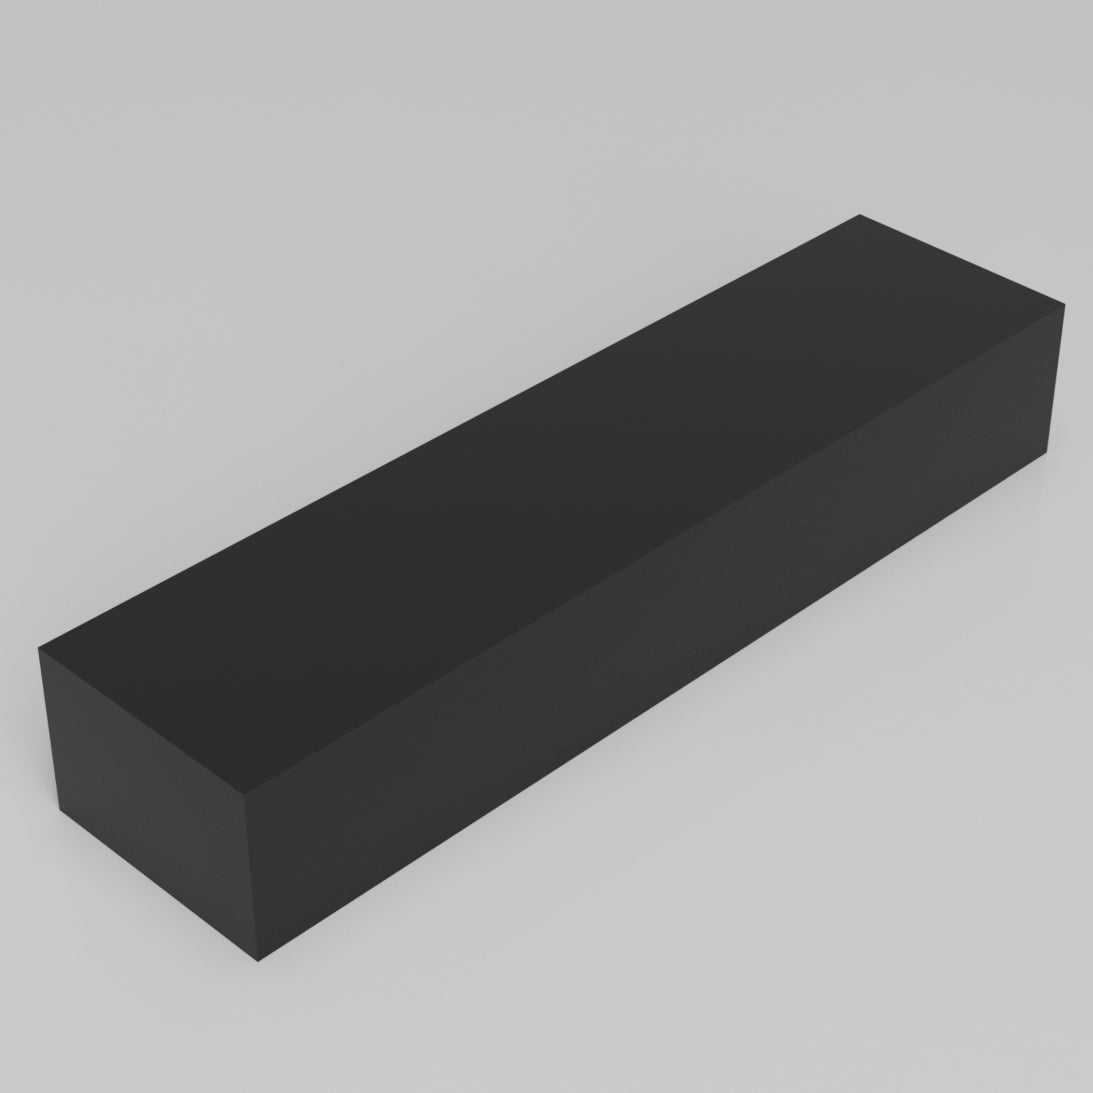 Machinable Wax Rectangular Block Front View 2 Inch by 3 Inch by 12 Inch